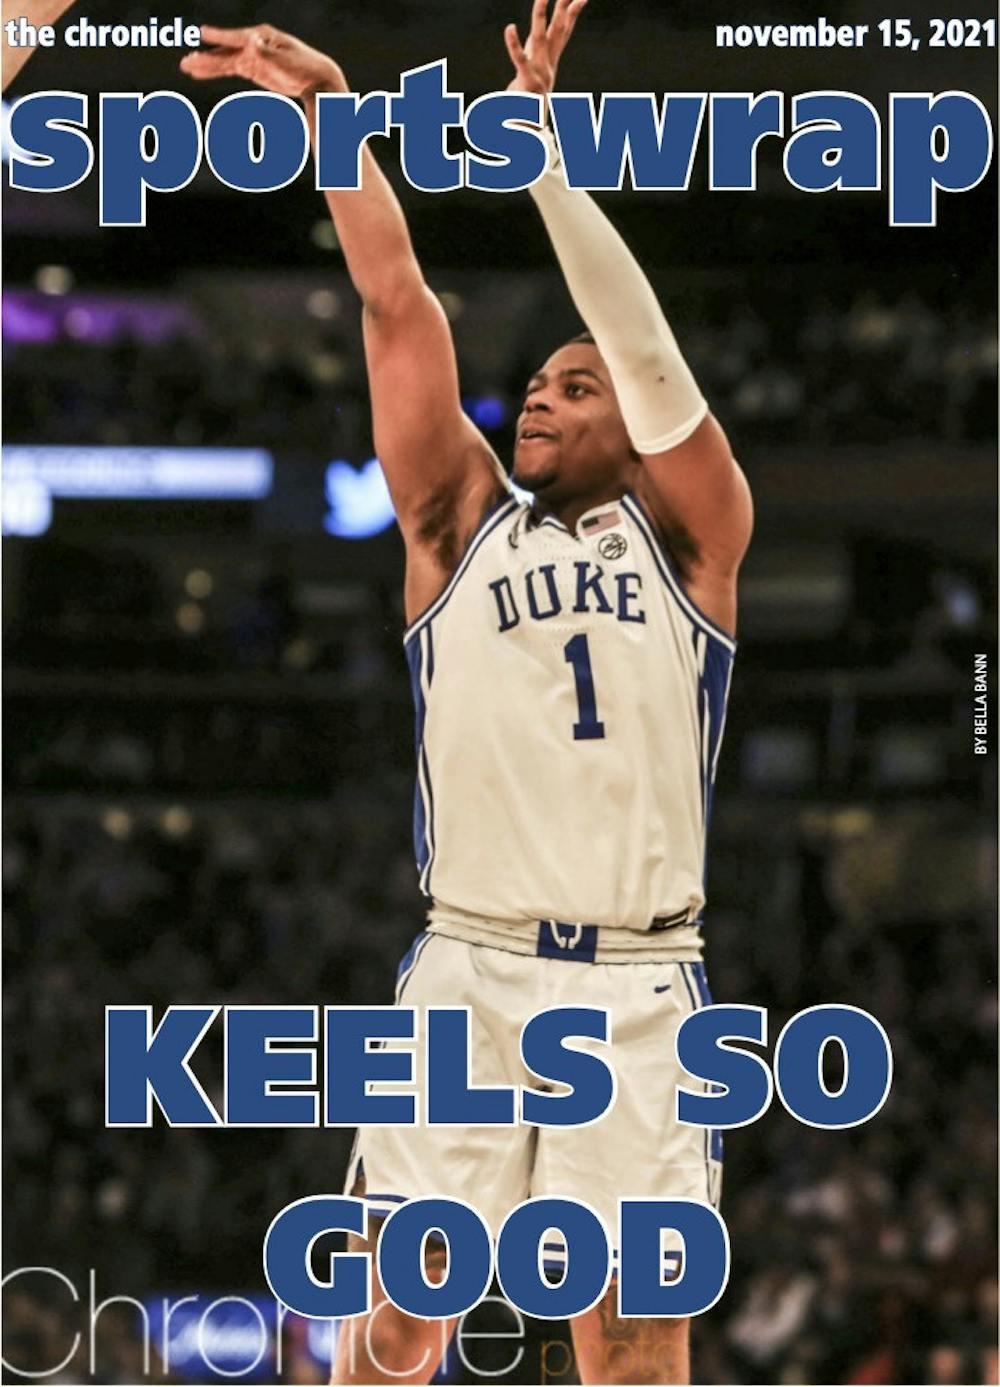 Freshman guard Trevor Keels lit it up in Madison Square Garden with 25 points and a critical layup to close the game. 